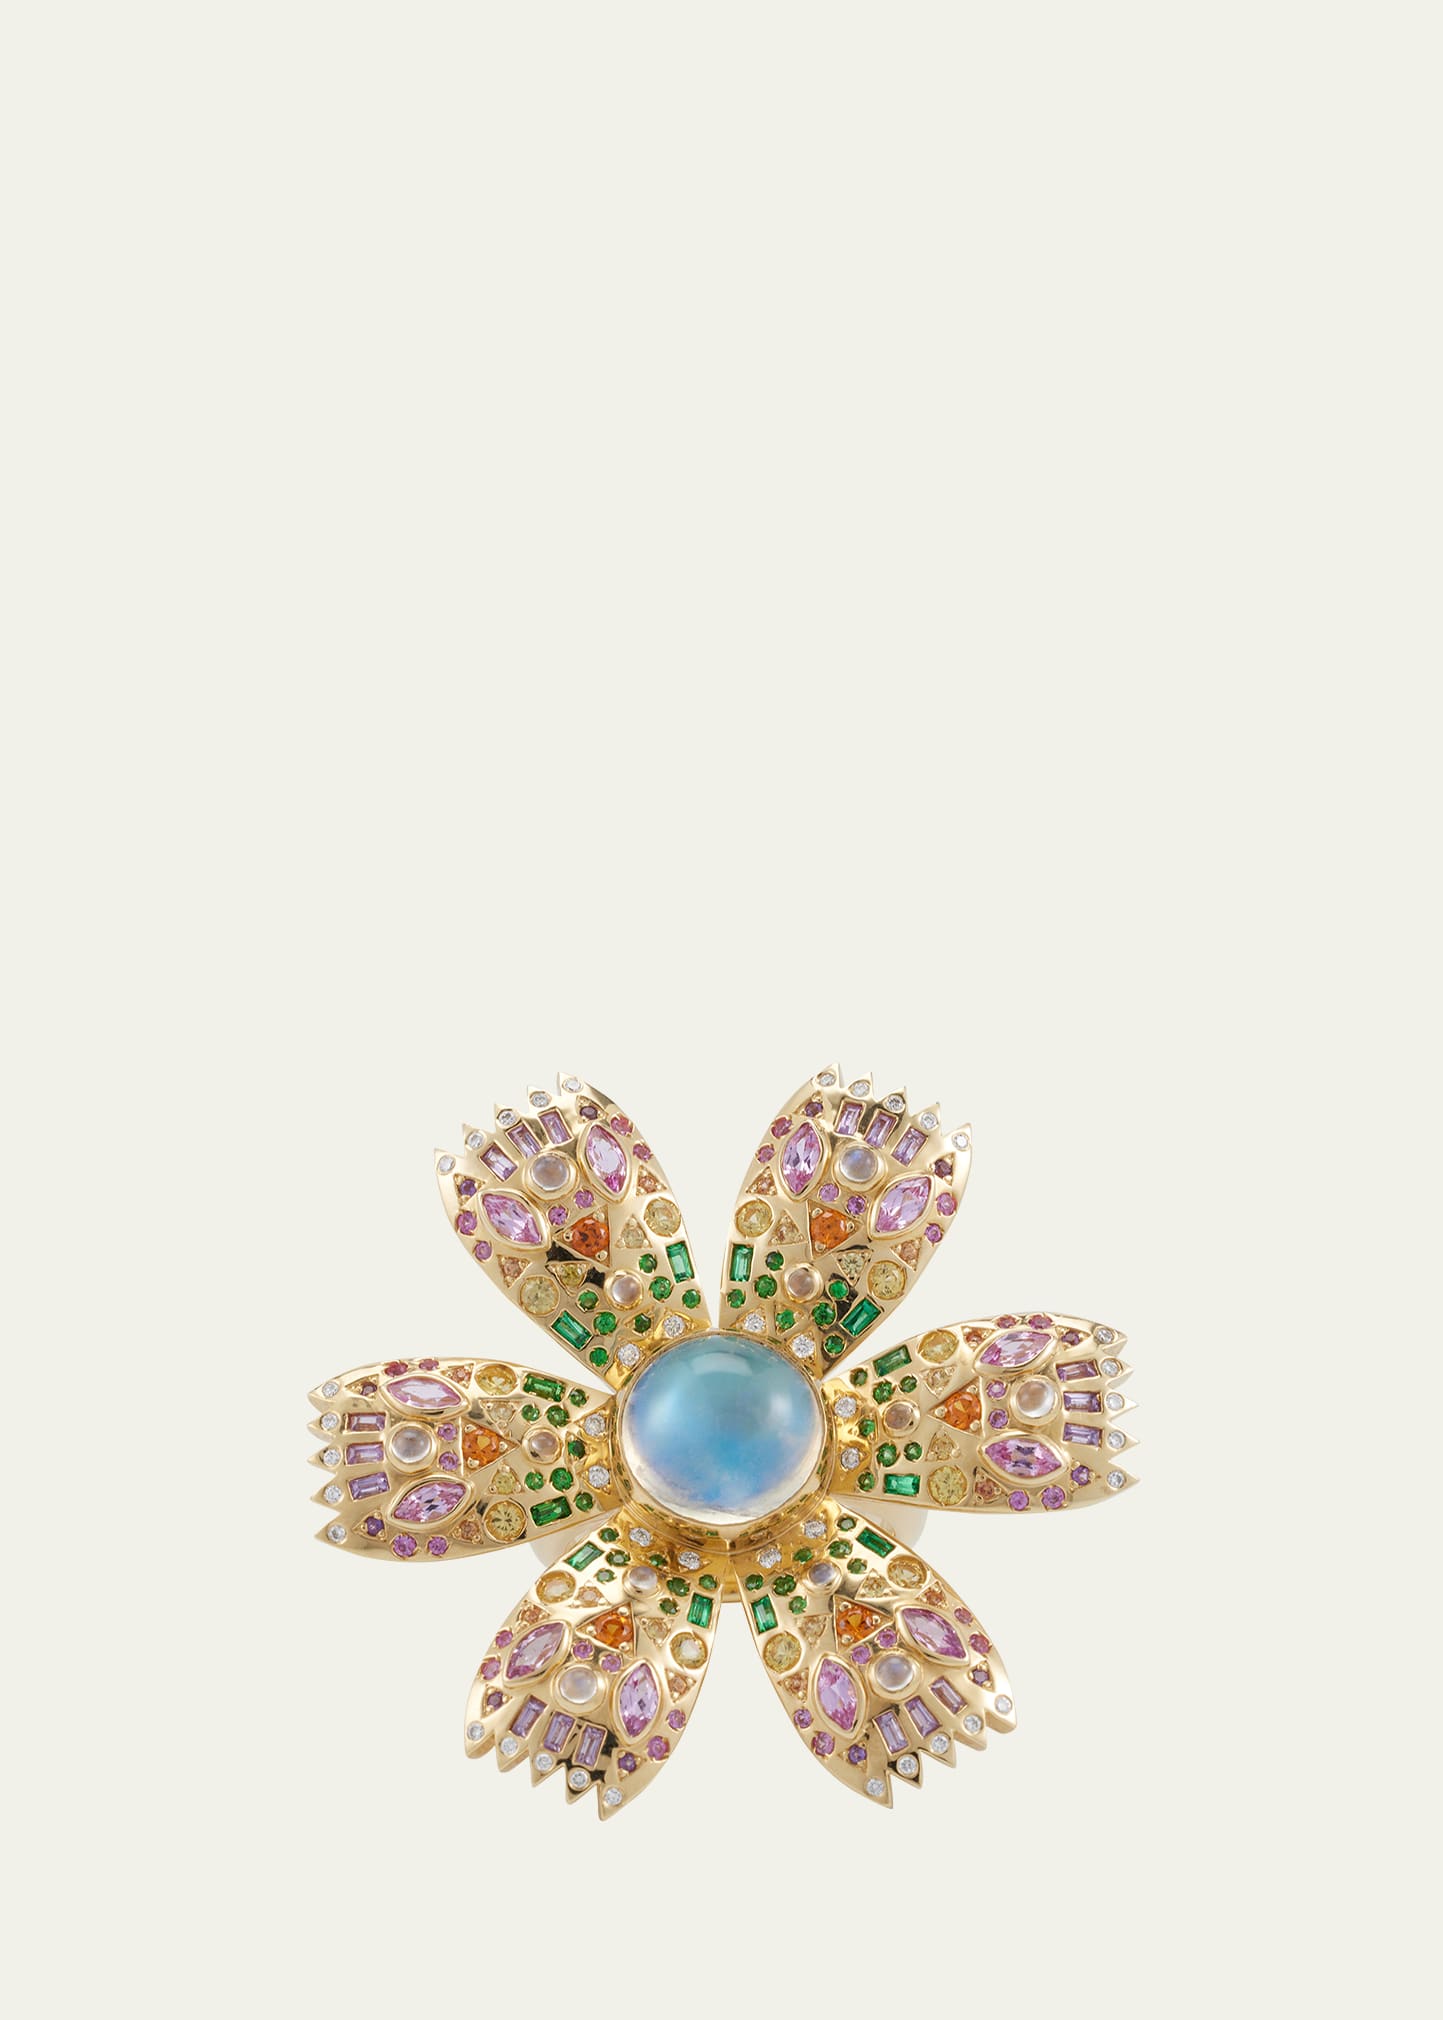 Harwell Godfrey Poppy Ring With Moonstone, Sapphires And Diamonds In Yg